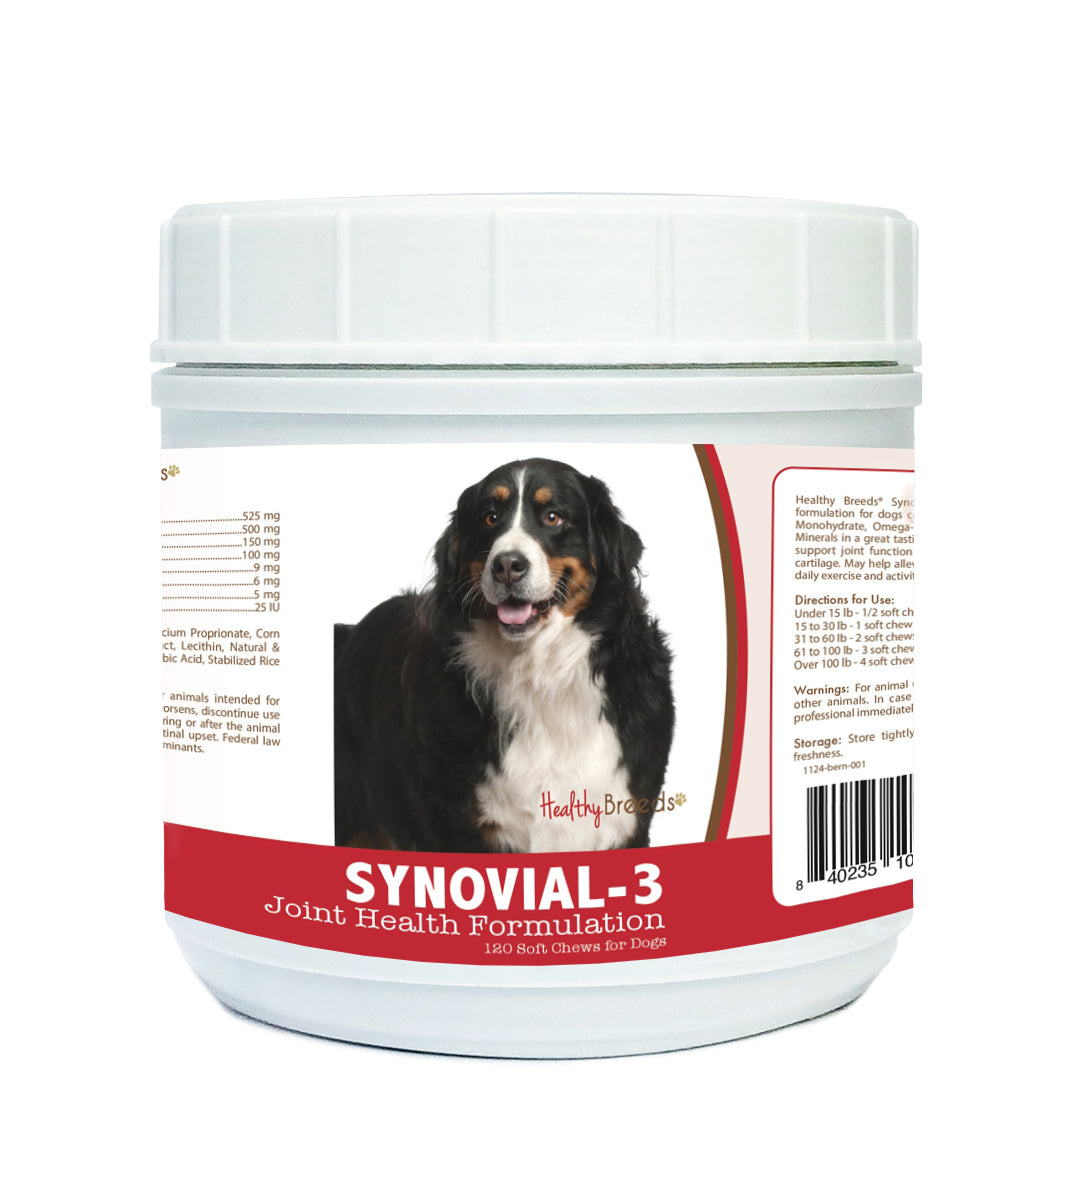 Healthy Breeds Bernese Mountain Dog Synovial-3 Joint Health Formulation Soft Chews 120 Count